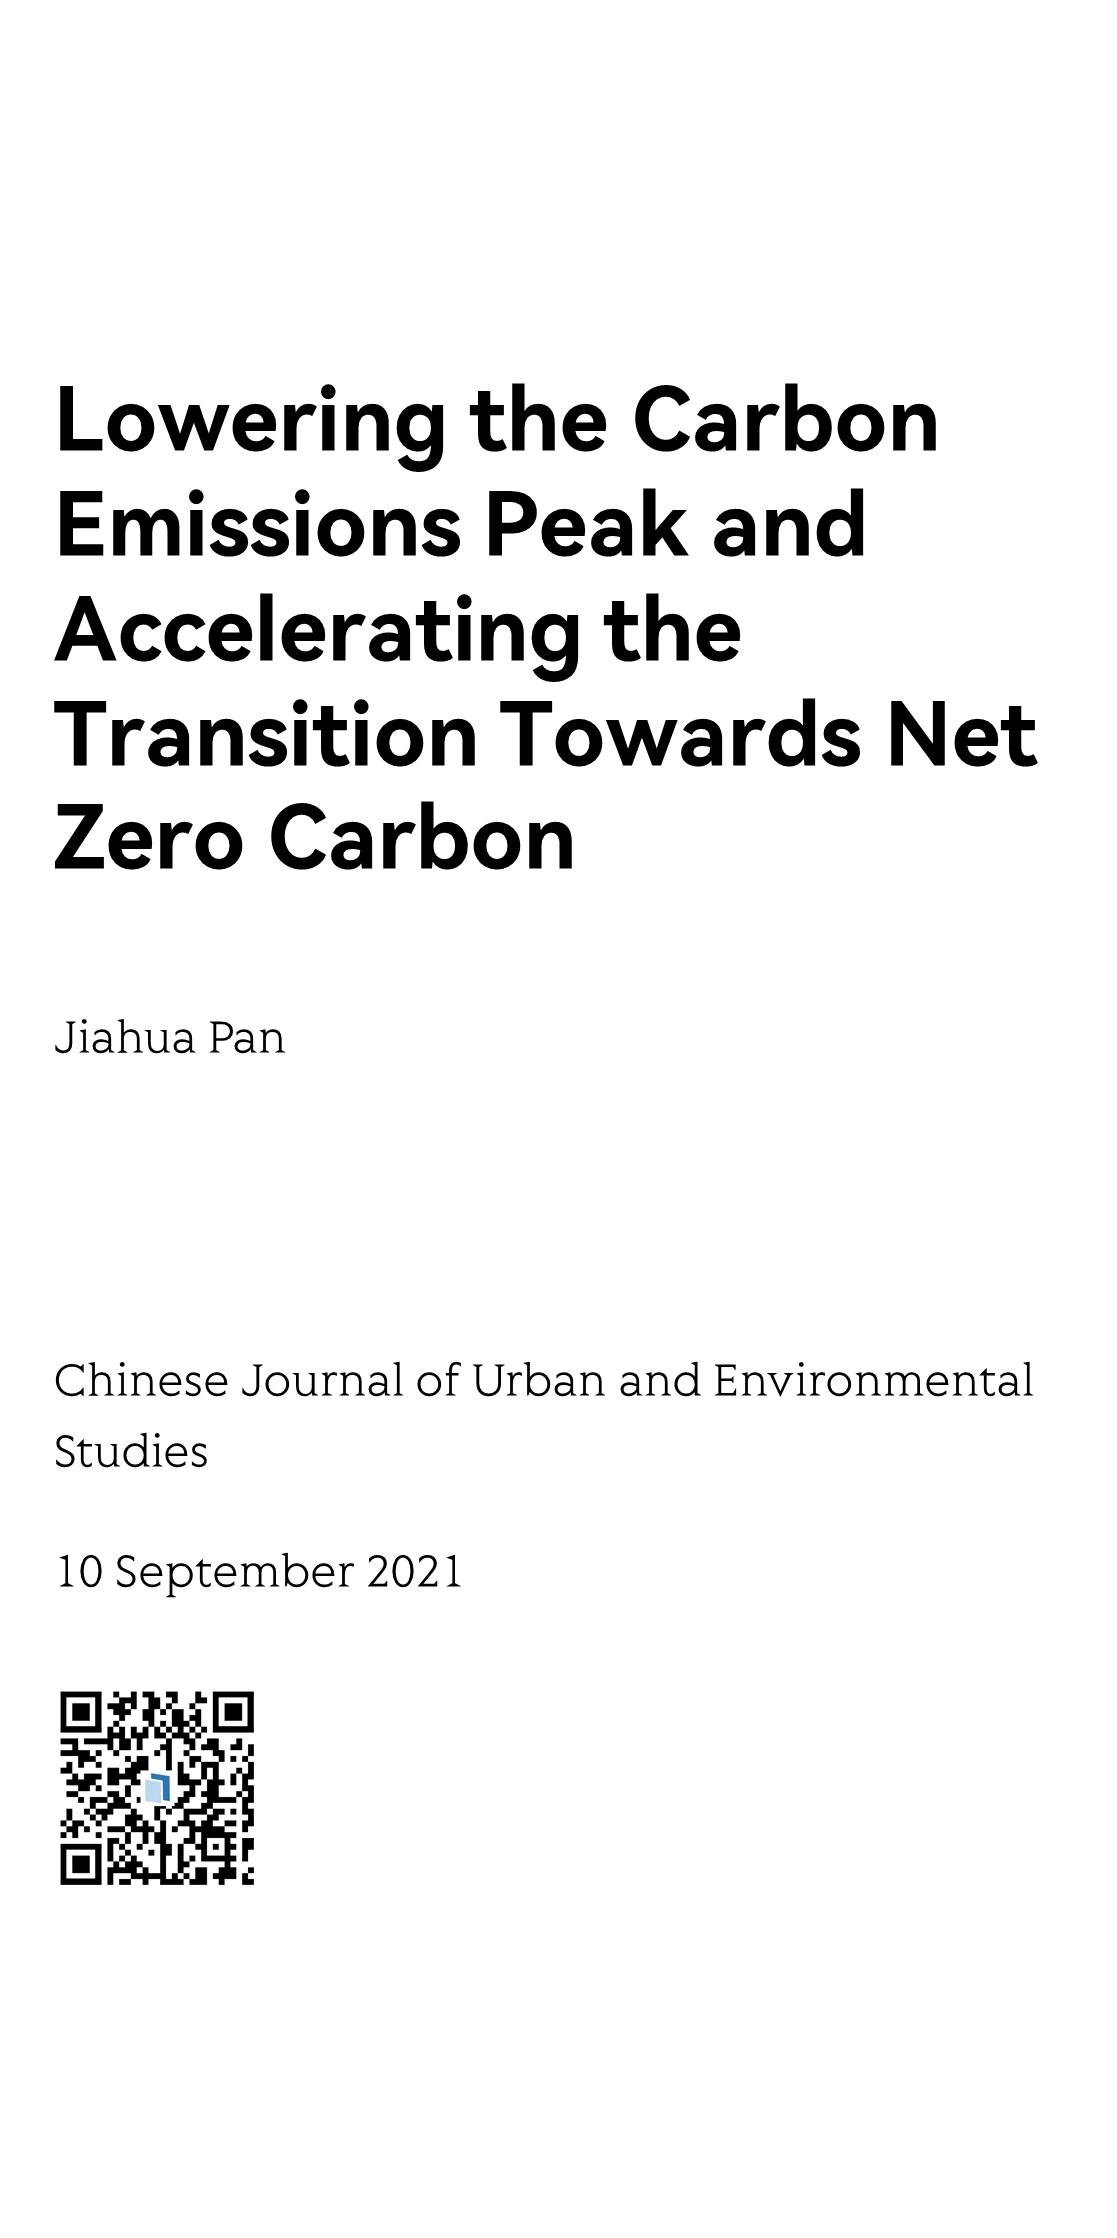 Lowering the Carbon Emissions Peak and Accelerating the Transition Towards Net Zero Carbon_1